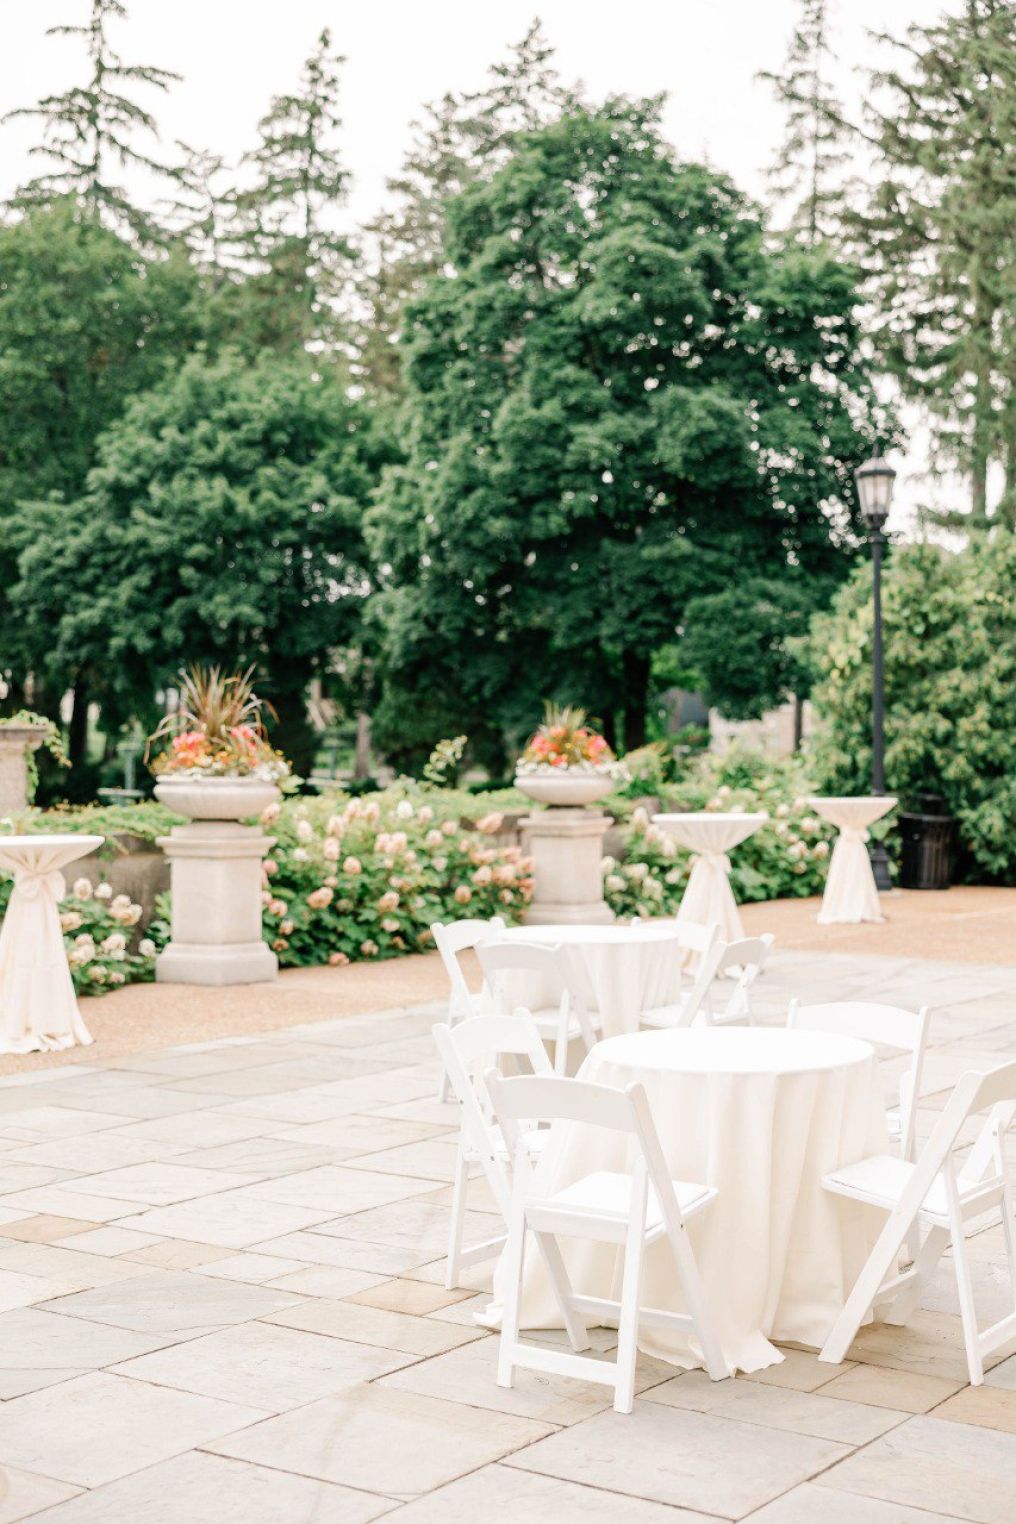 Loyola at Cuneo Mansion and Gardens Venue photo